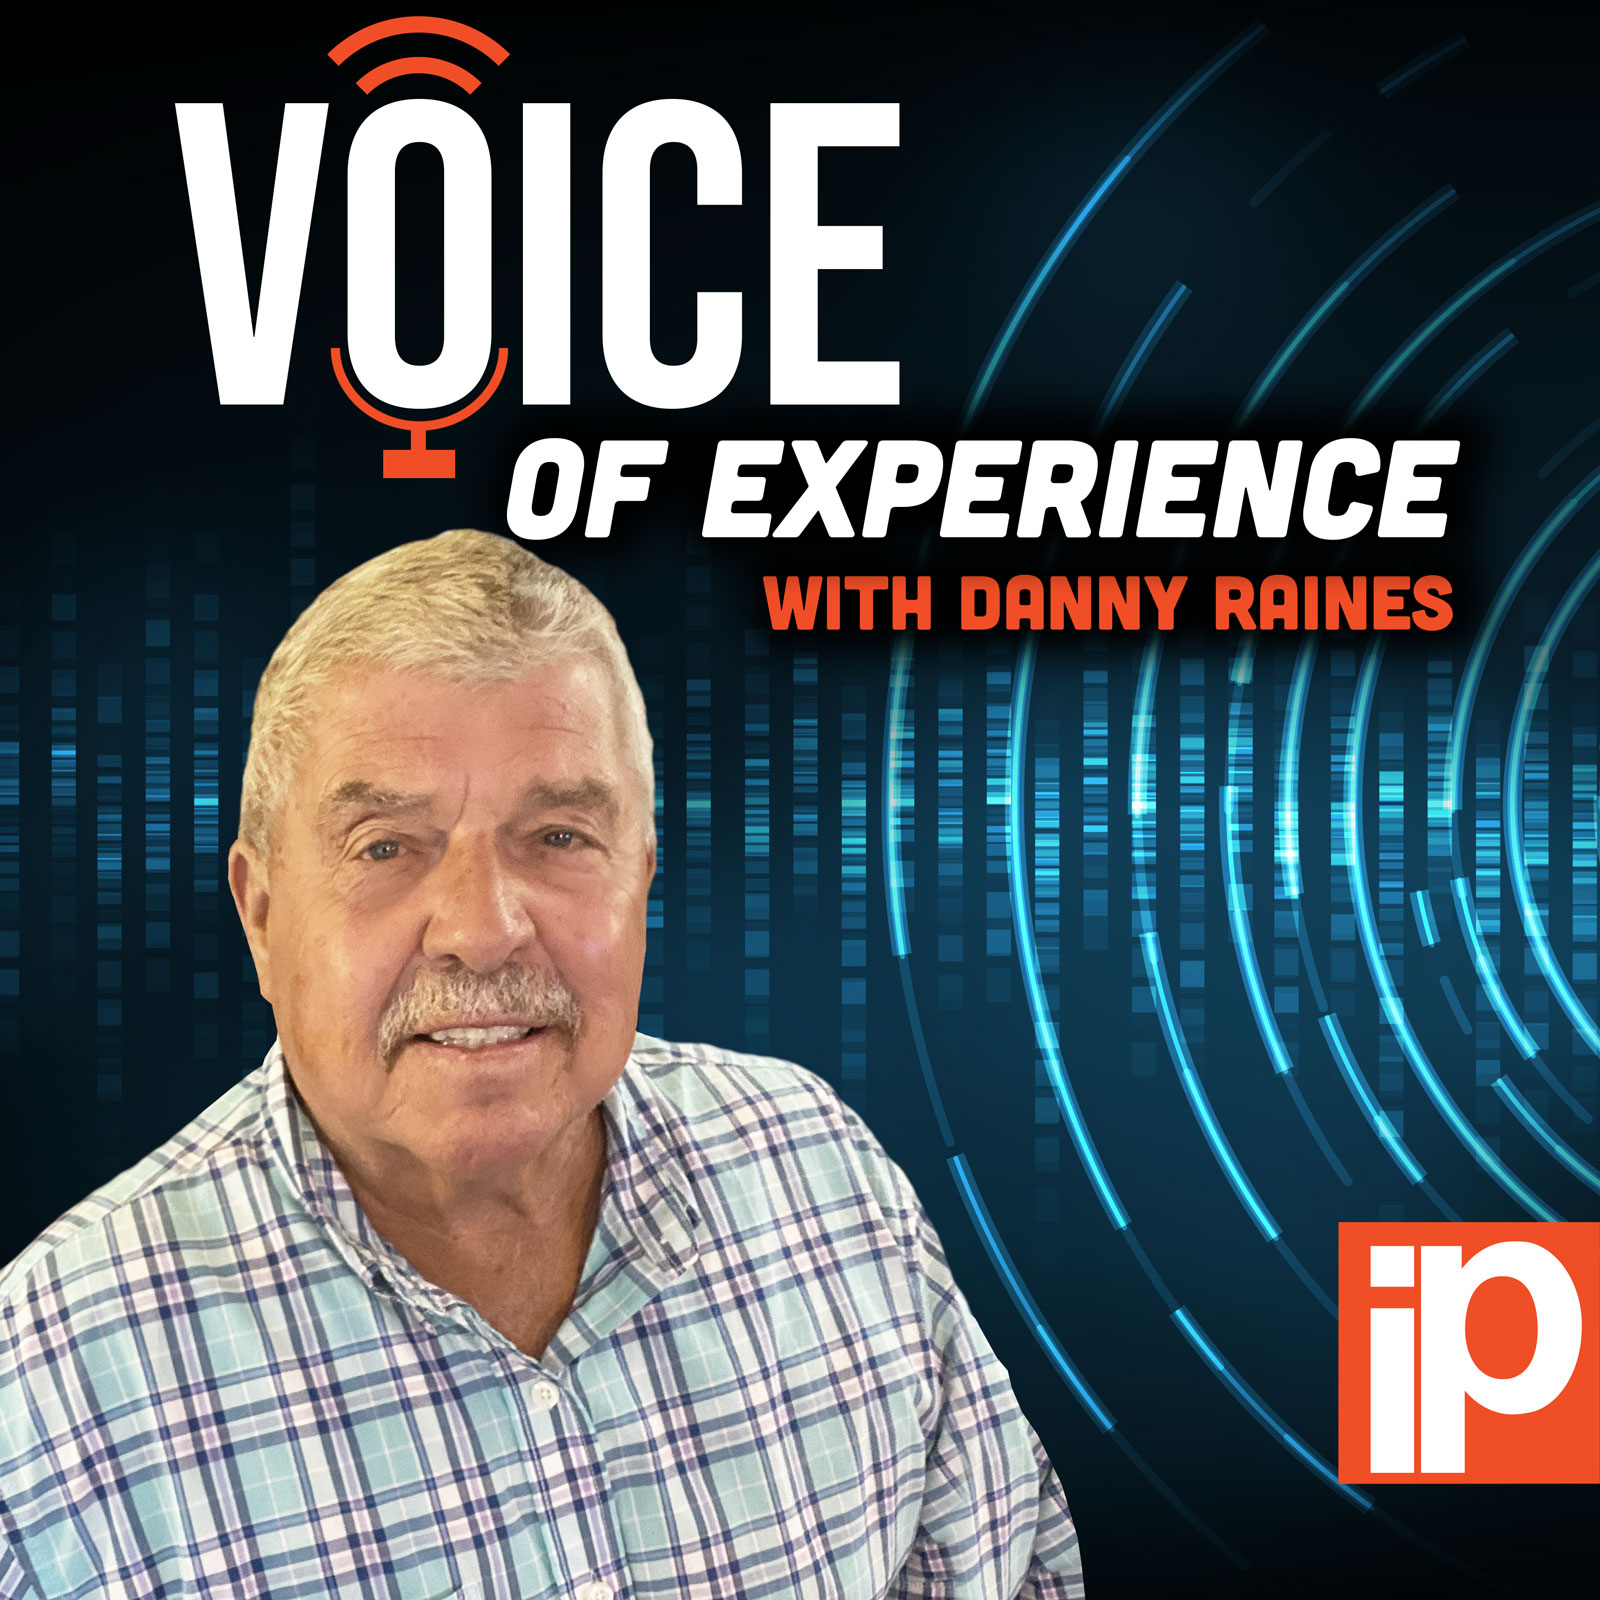 Voice of Experience Podcasts